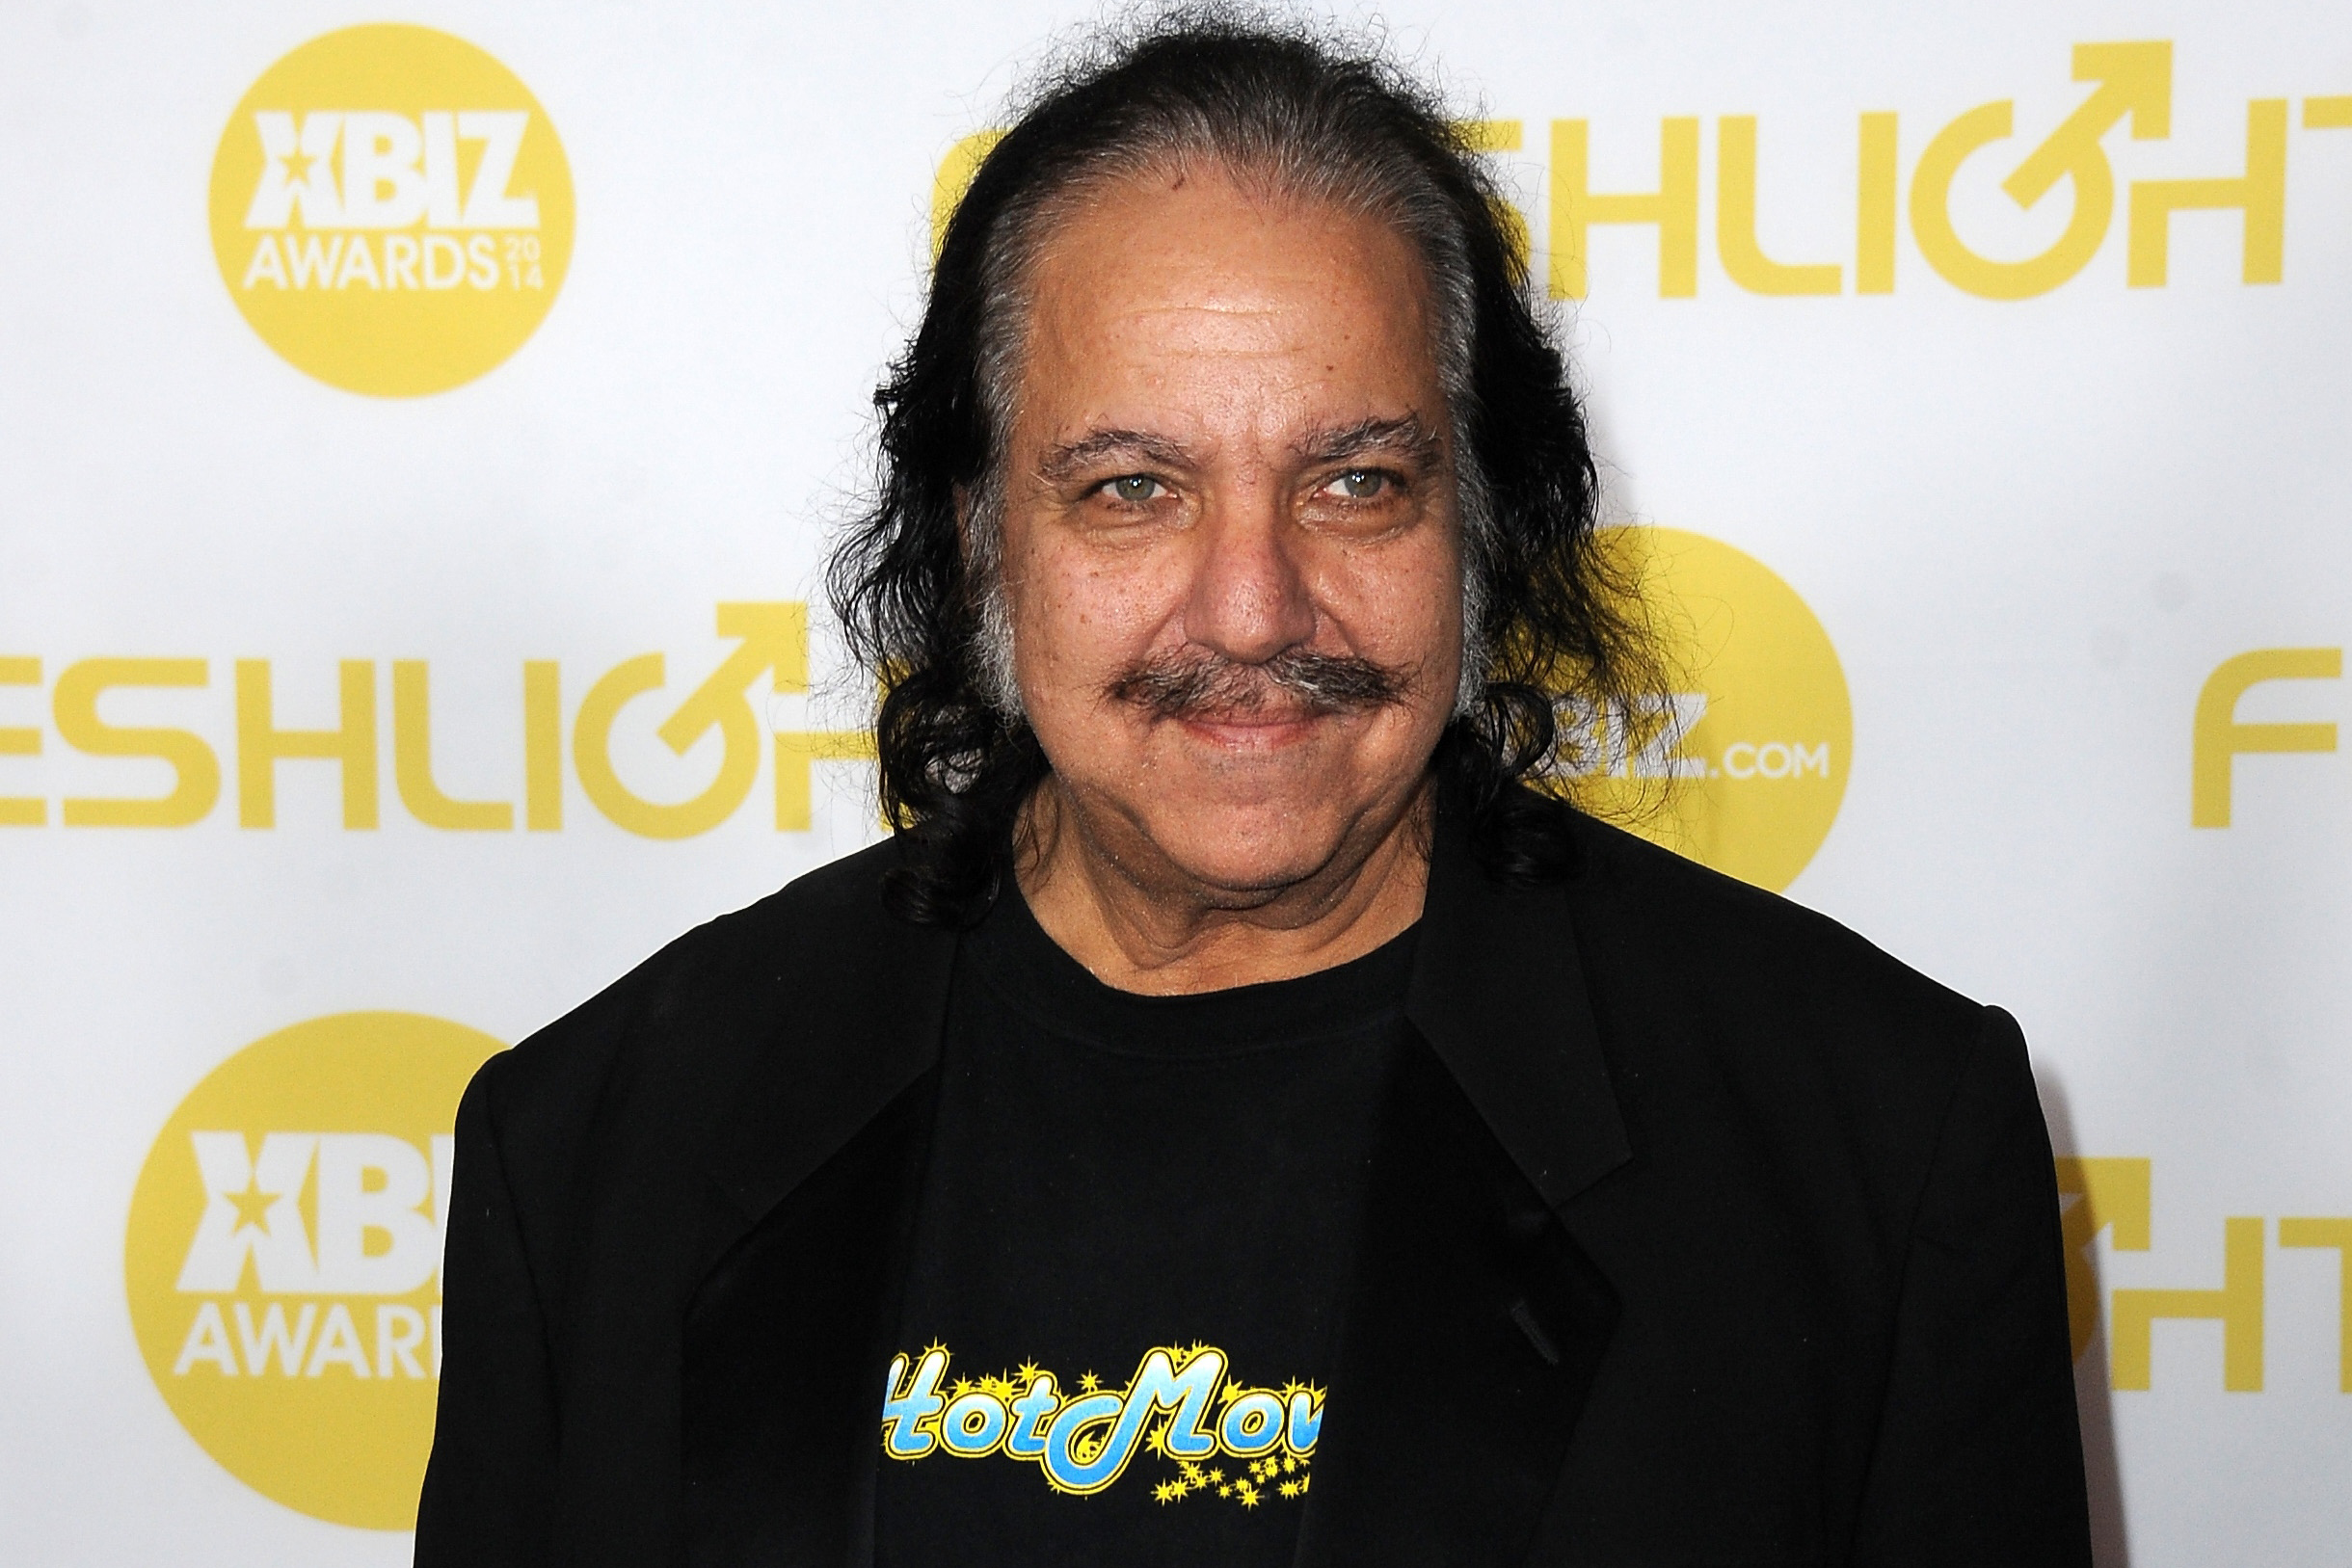 dawn fitzhugh recommends ron jeremy movies pic